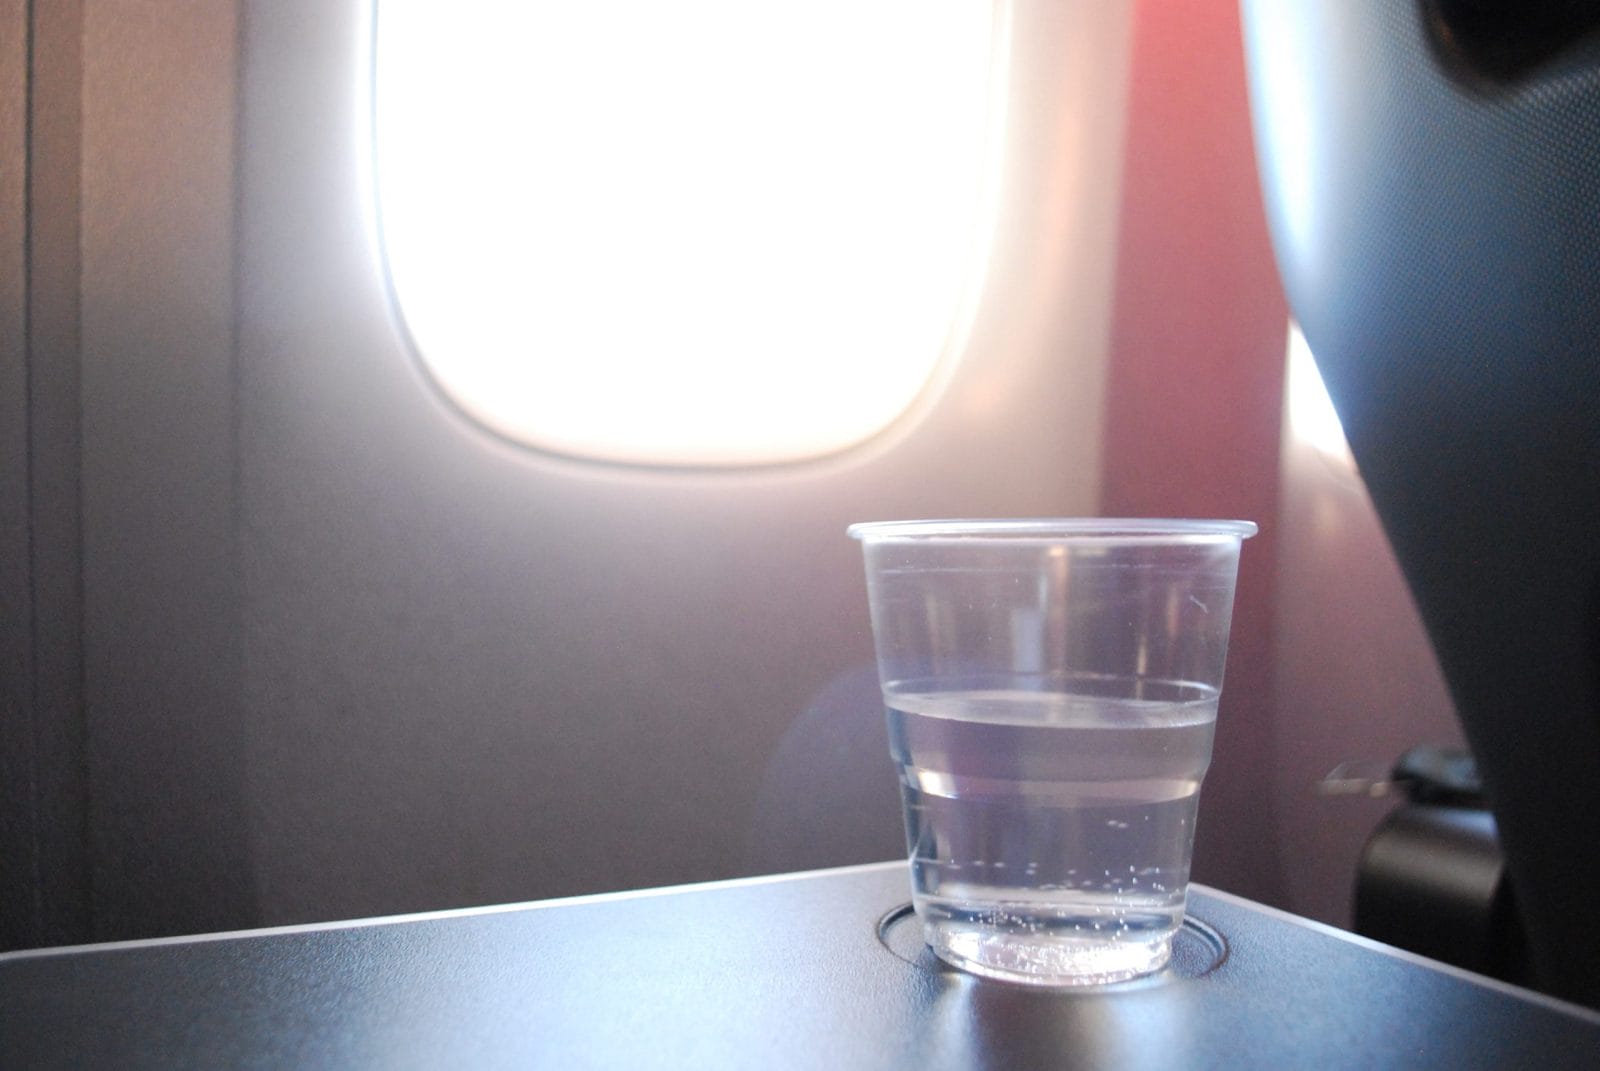 Small glass of water on flight